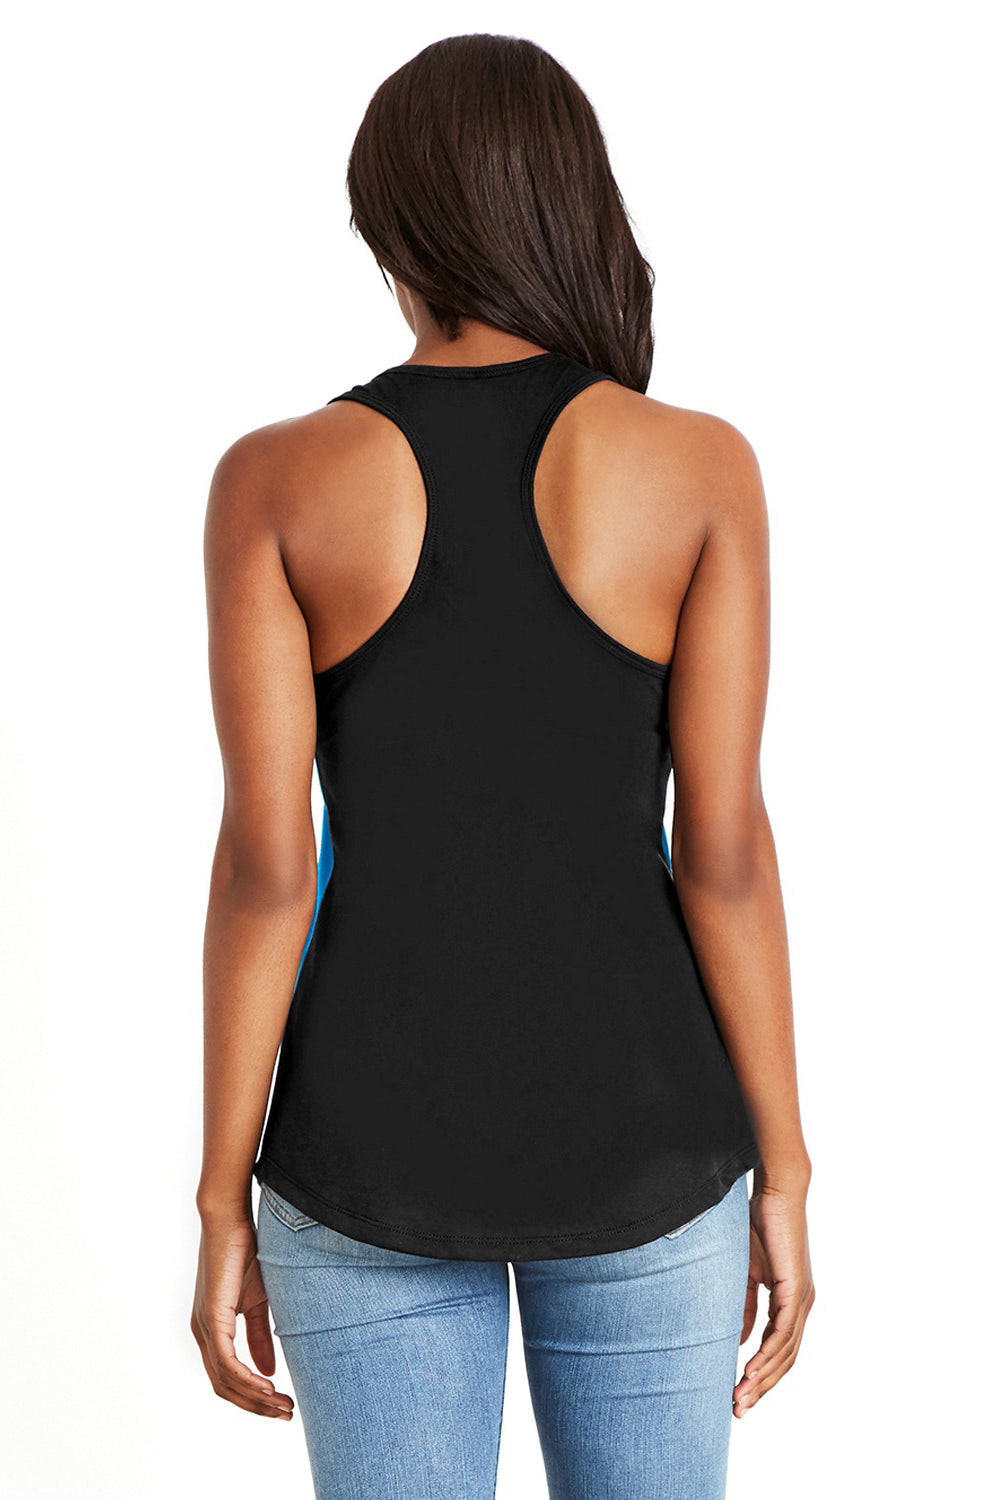 Next Level 1534 Womens Ideal Tank Top Turquoise Blue/Black Back